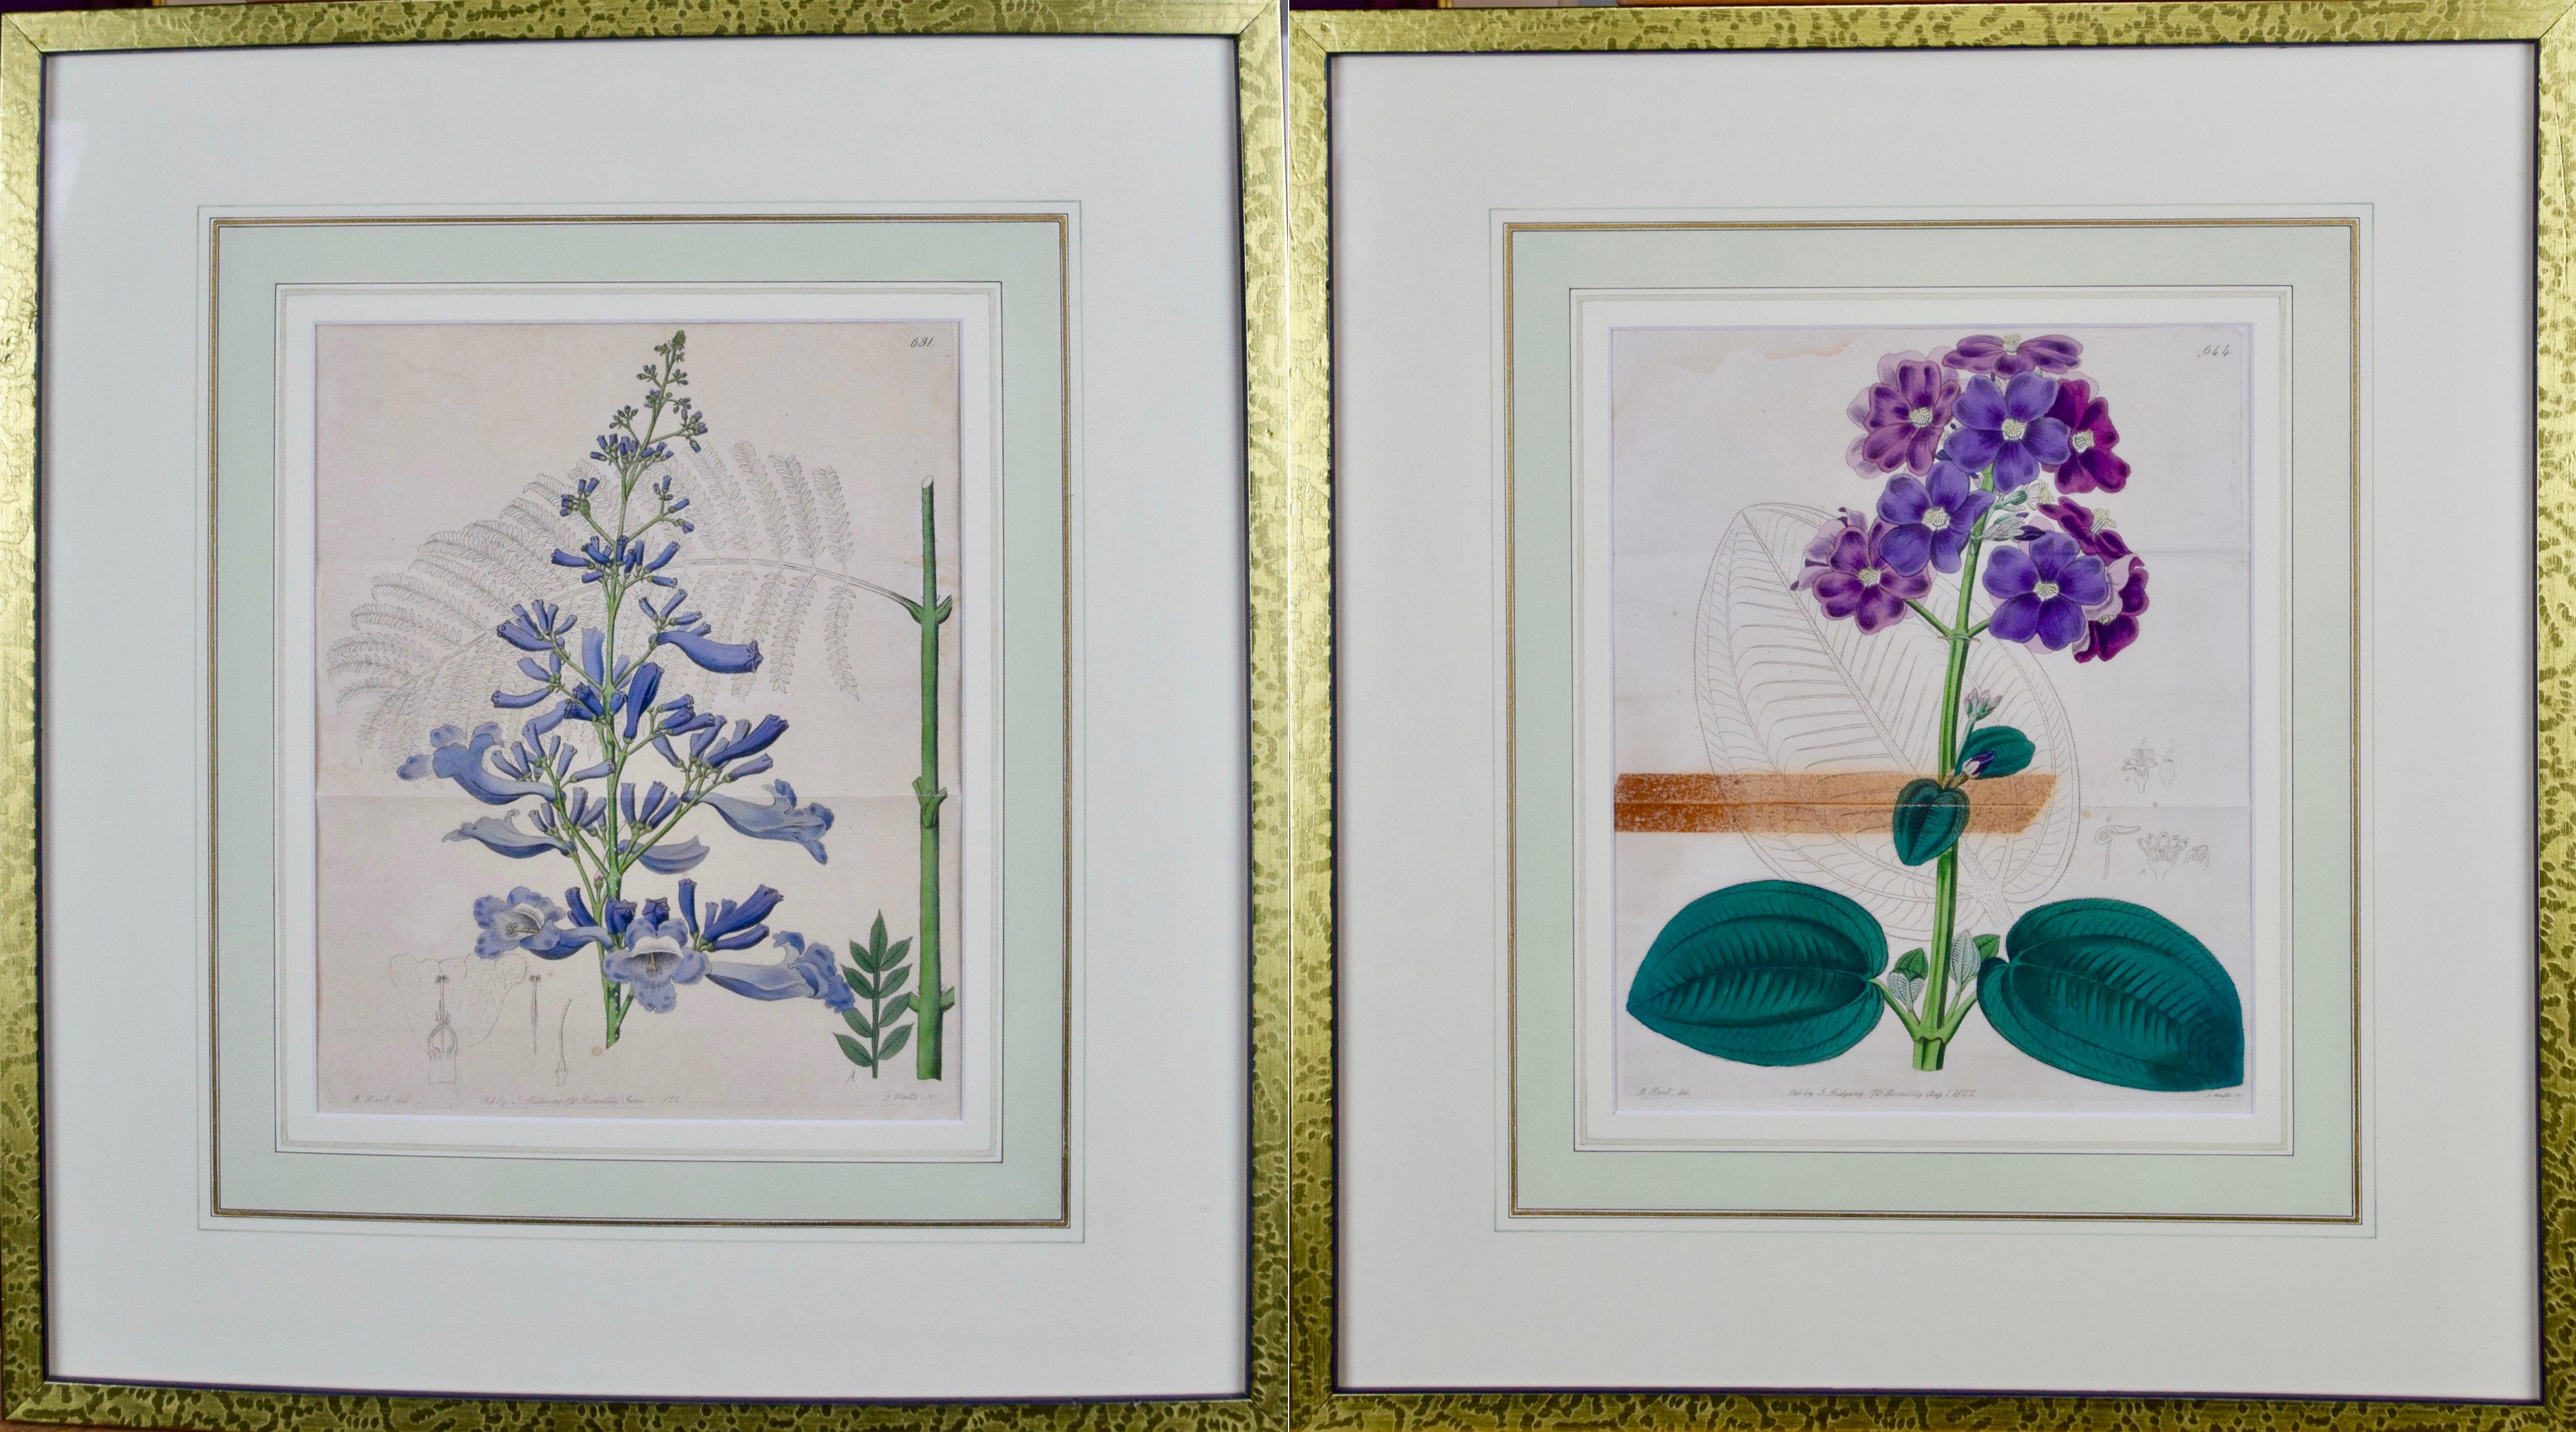 Sydenham Edwards Still-Life Print - A Pair of 19th C. Framed Hand Colored Edwards' Botanical Engravings of Flowers